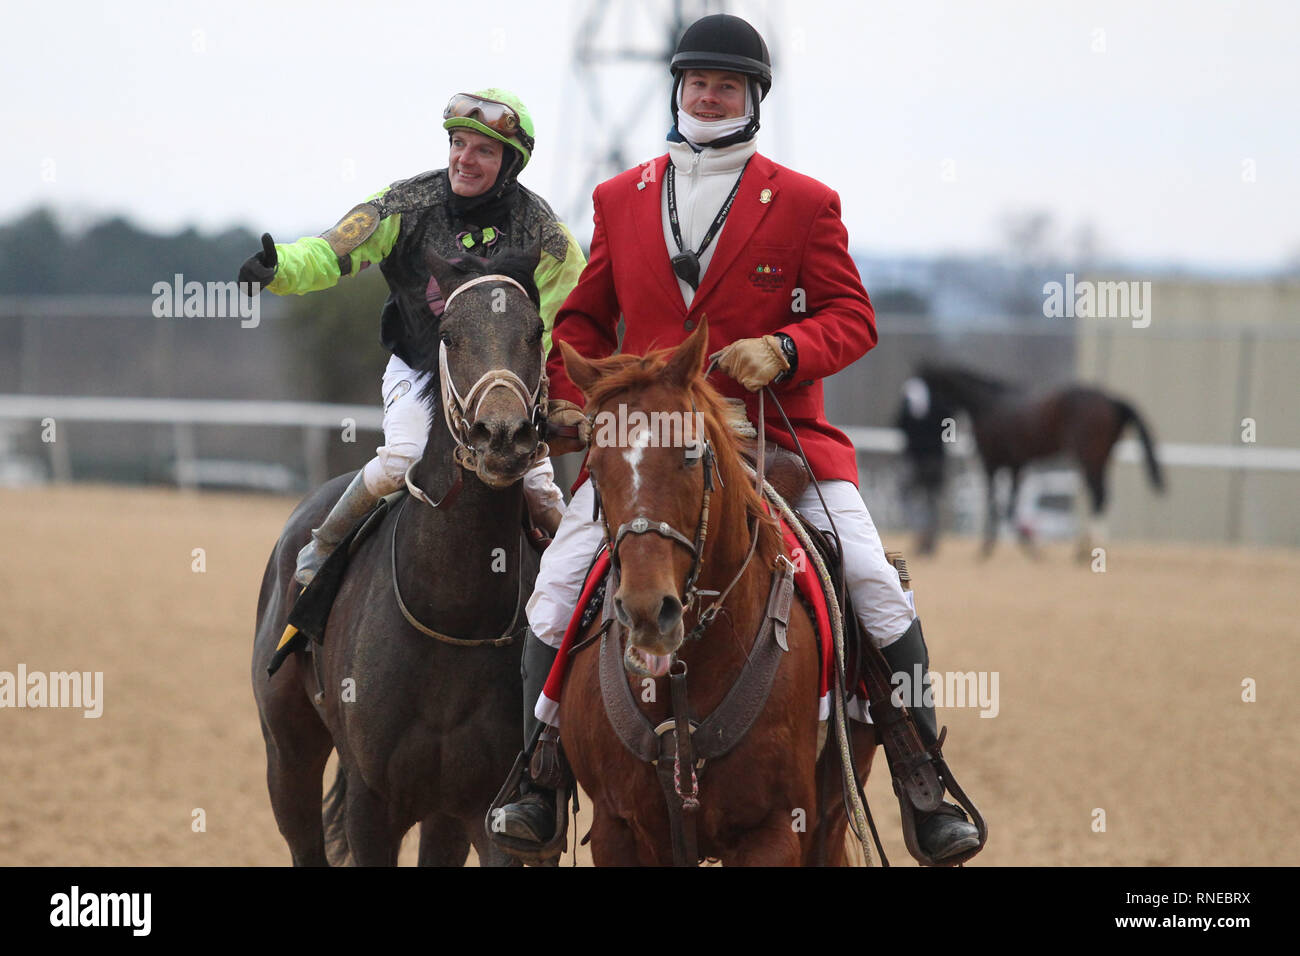 Hot Spring, AR, USA. 18th Feb, 2019. Feburary 18, 2019: Super Steed (6) with jockey Terry Thompson aboard after winning the Southwest Stakes at Oaklawn Park in Hot Spring, AR on February 18, 2019. © Justin Manning/Eclipse Sportswire/CSM/Alamy Live News Stock Photo